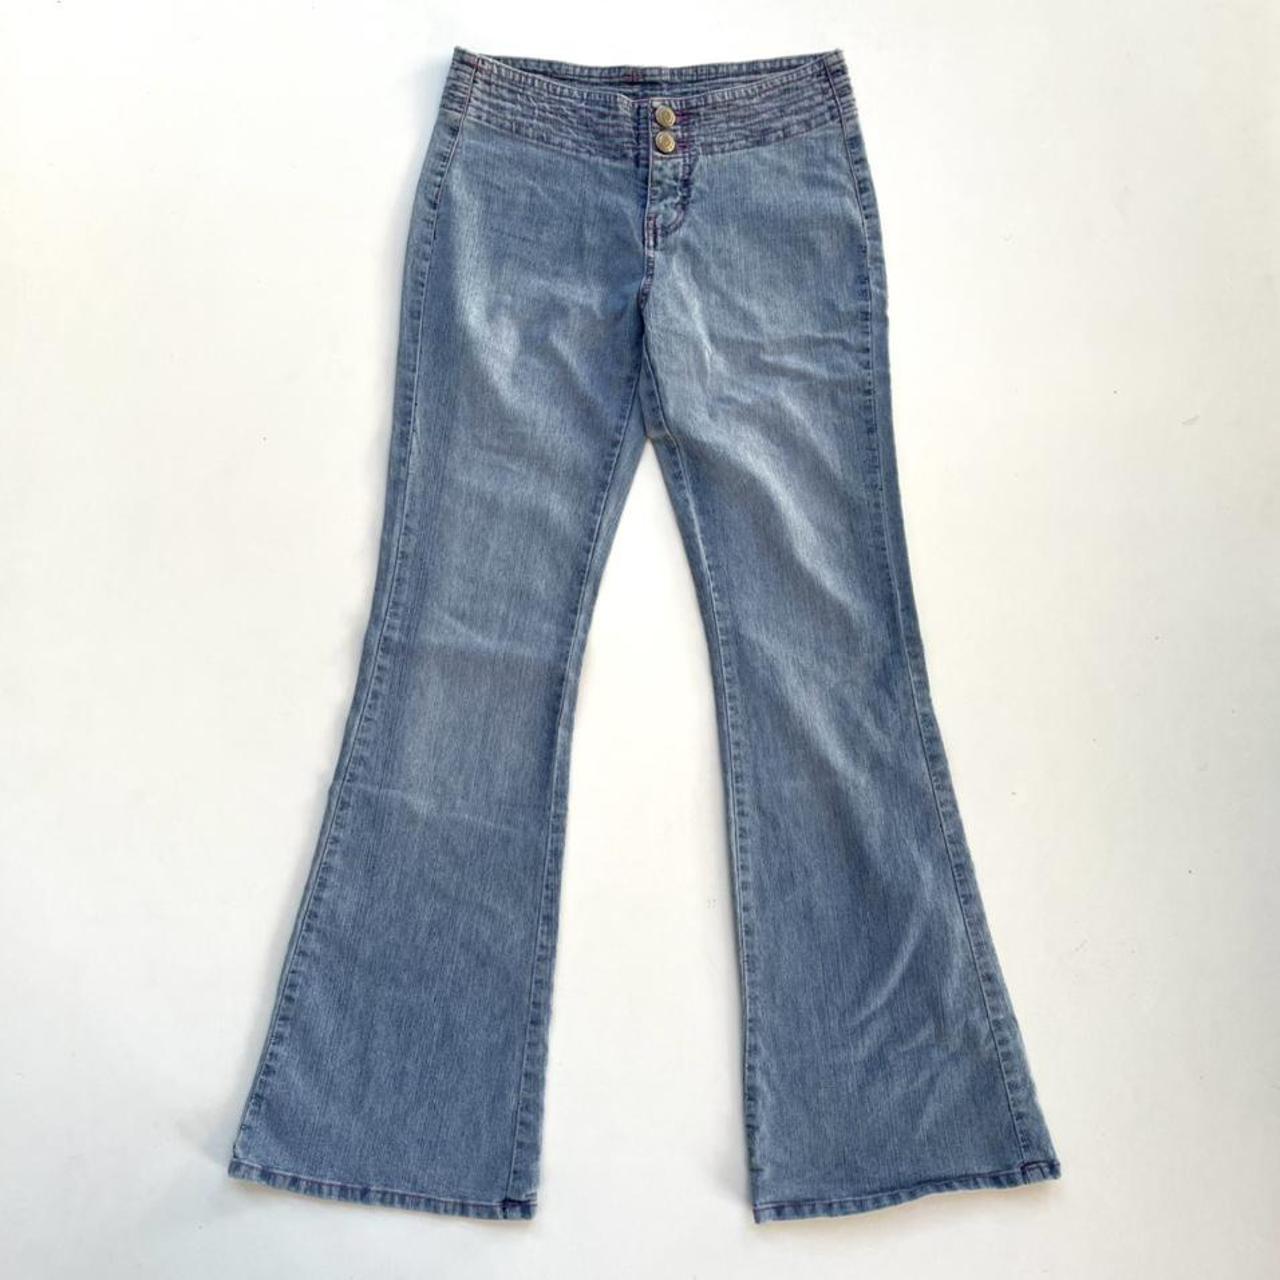 Unreal early 2000’s low rise flared jeans! Love the... - Depop